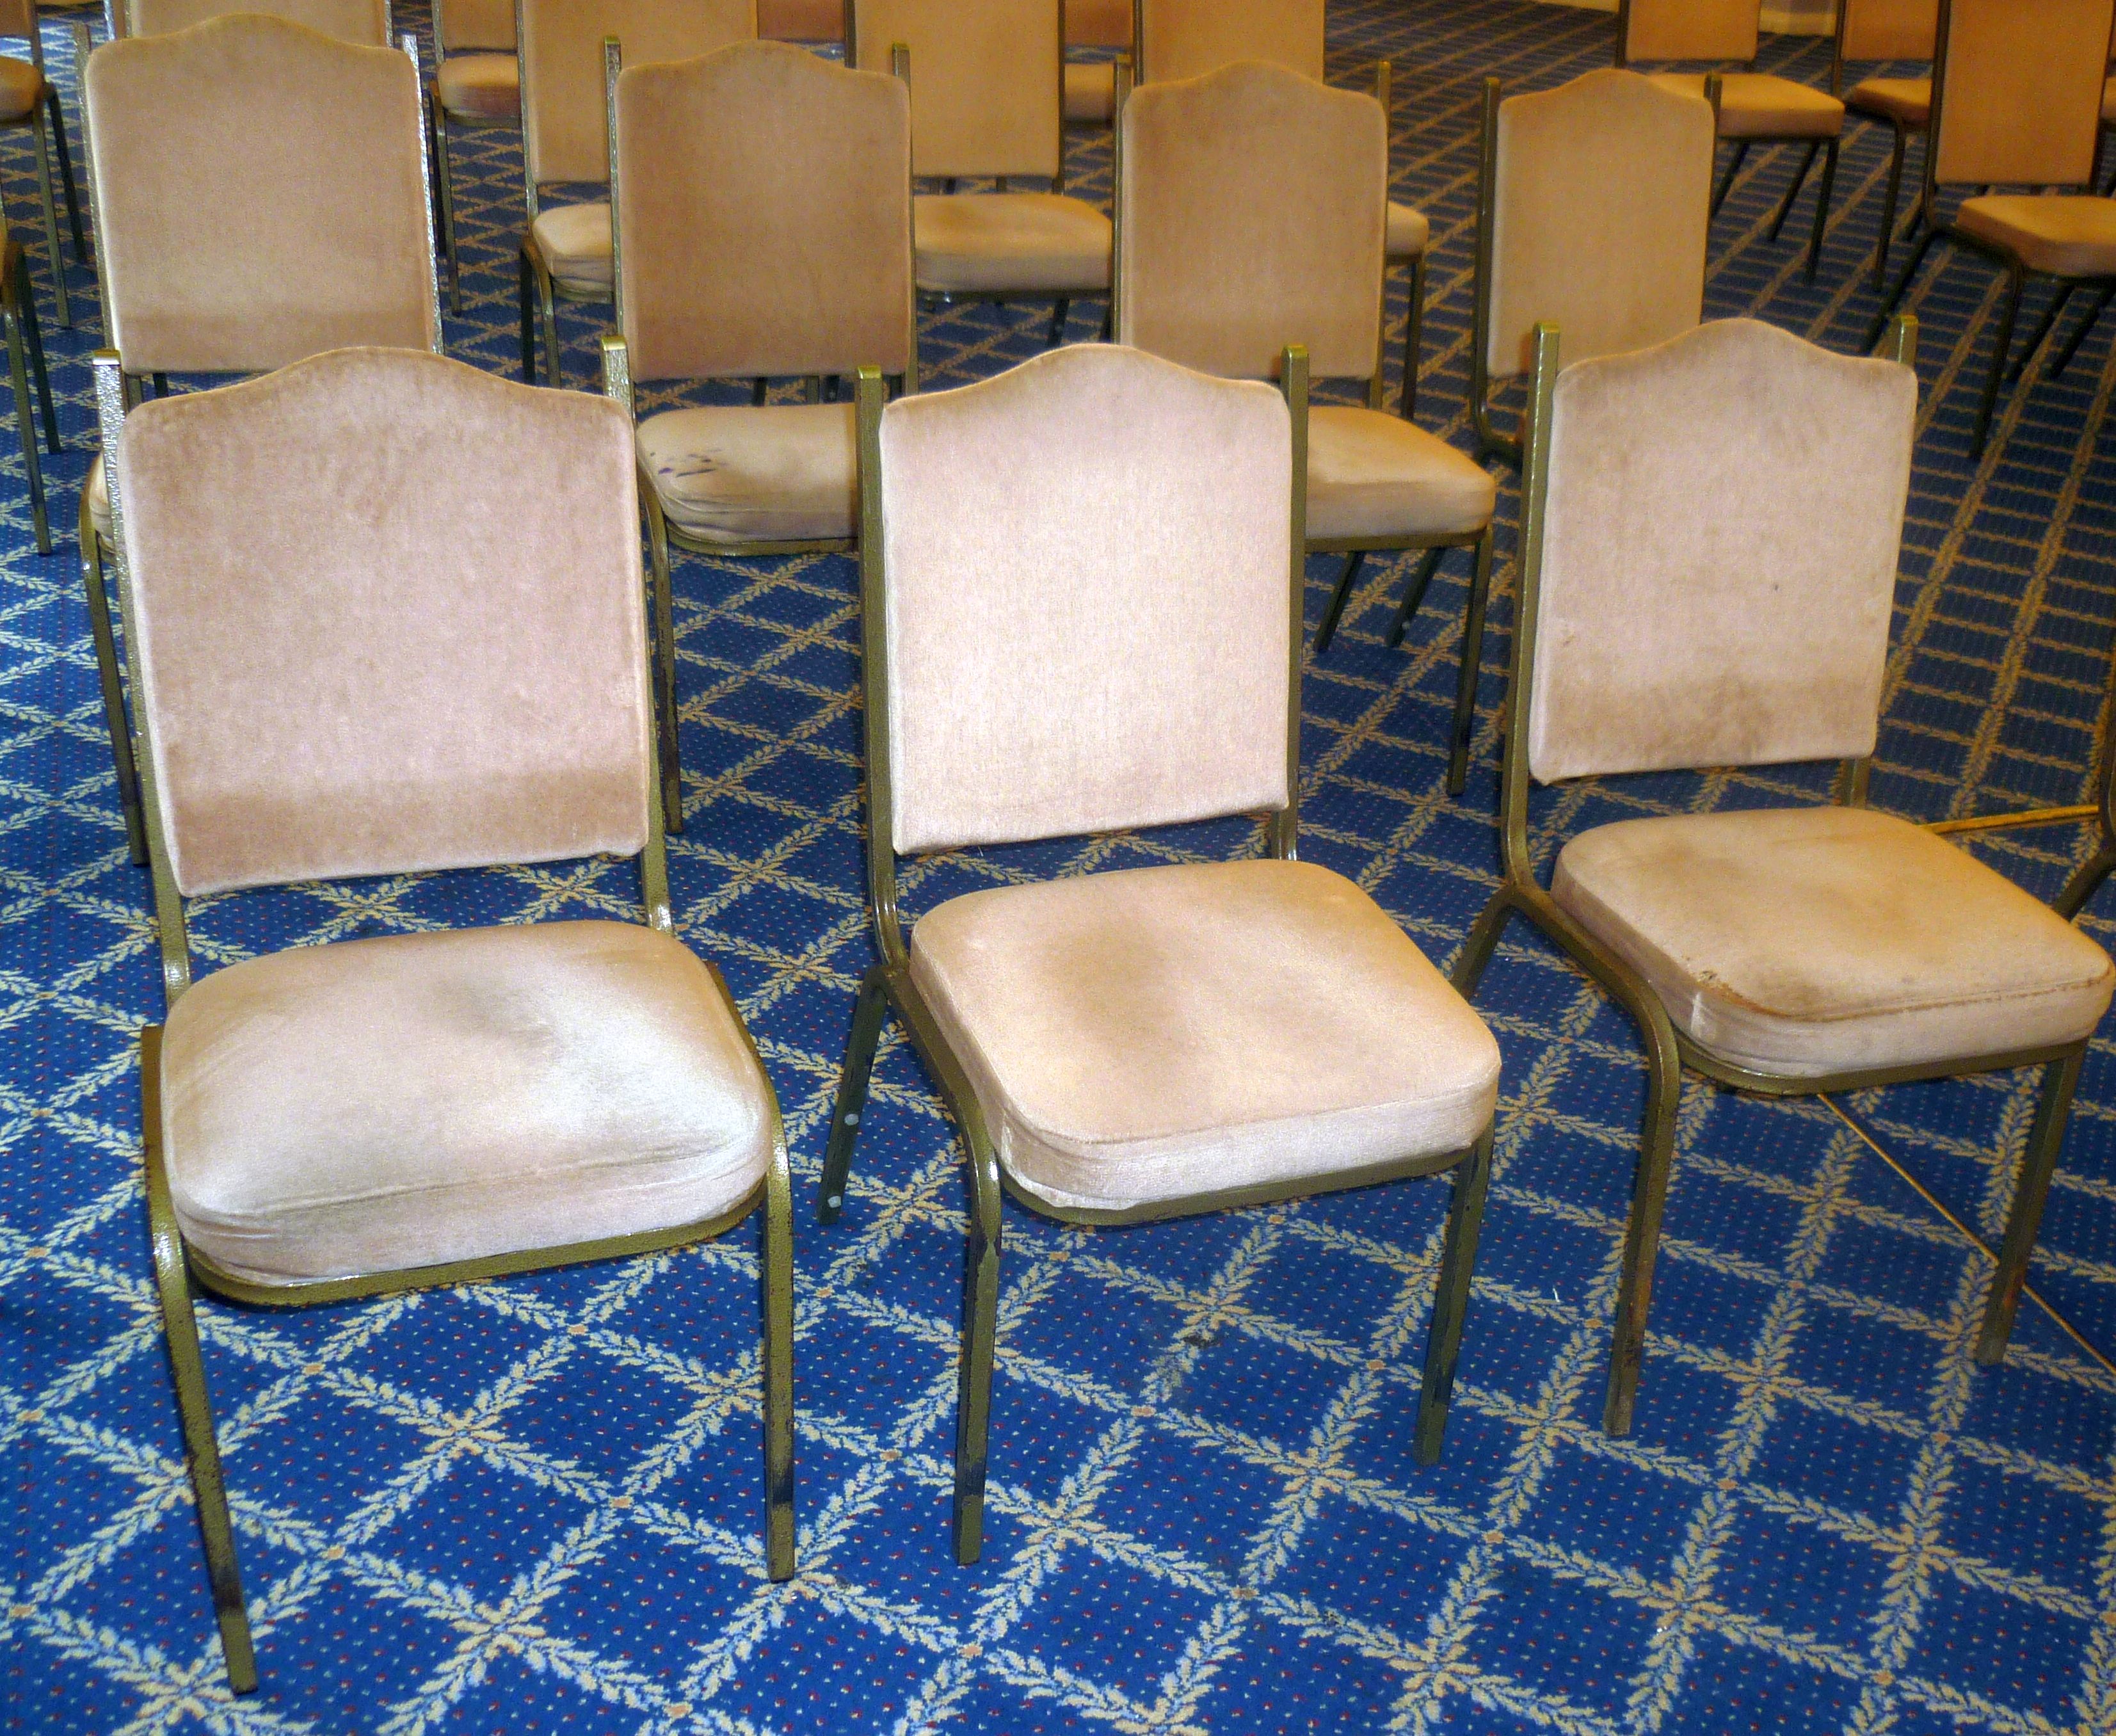 *A set of 20, stackable metal framed dining/ meeting chairs with padded backs and seats covered in